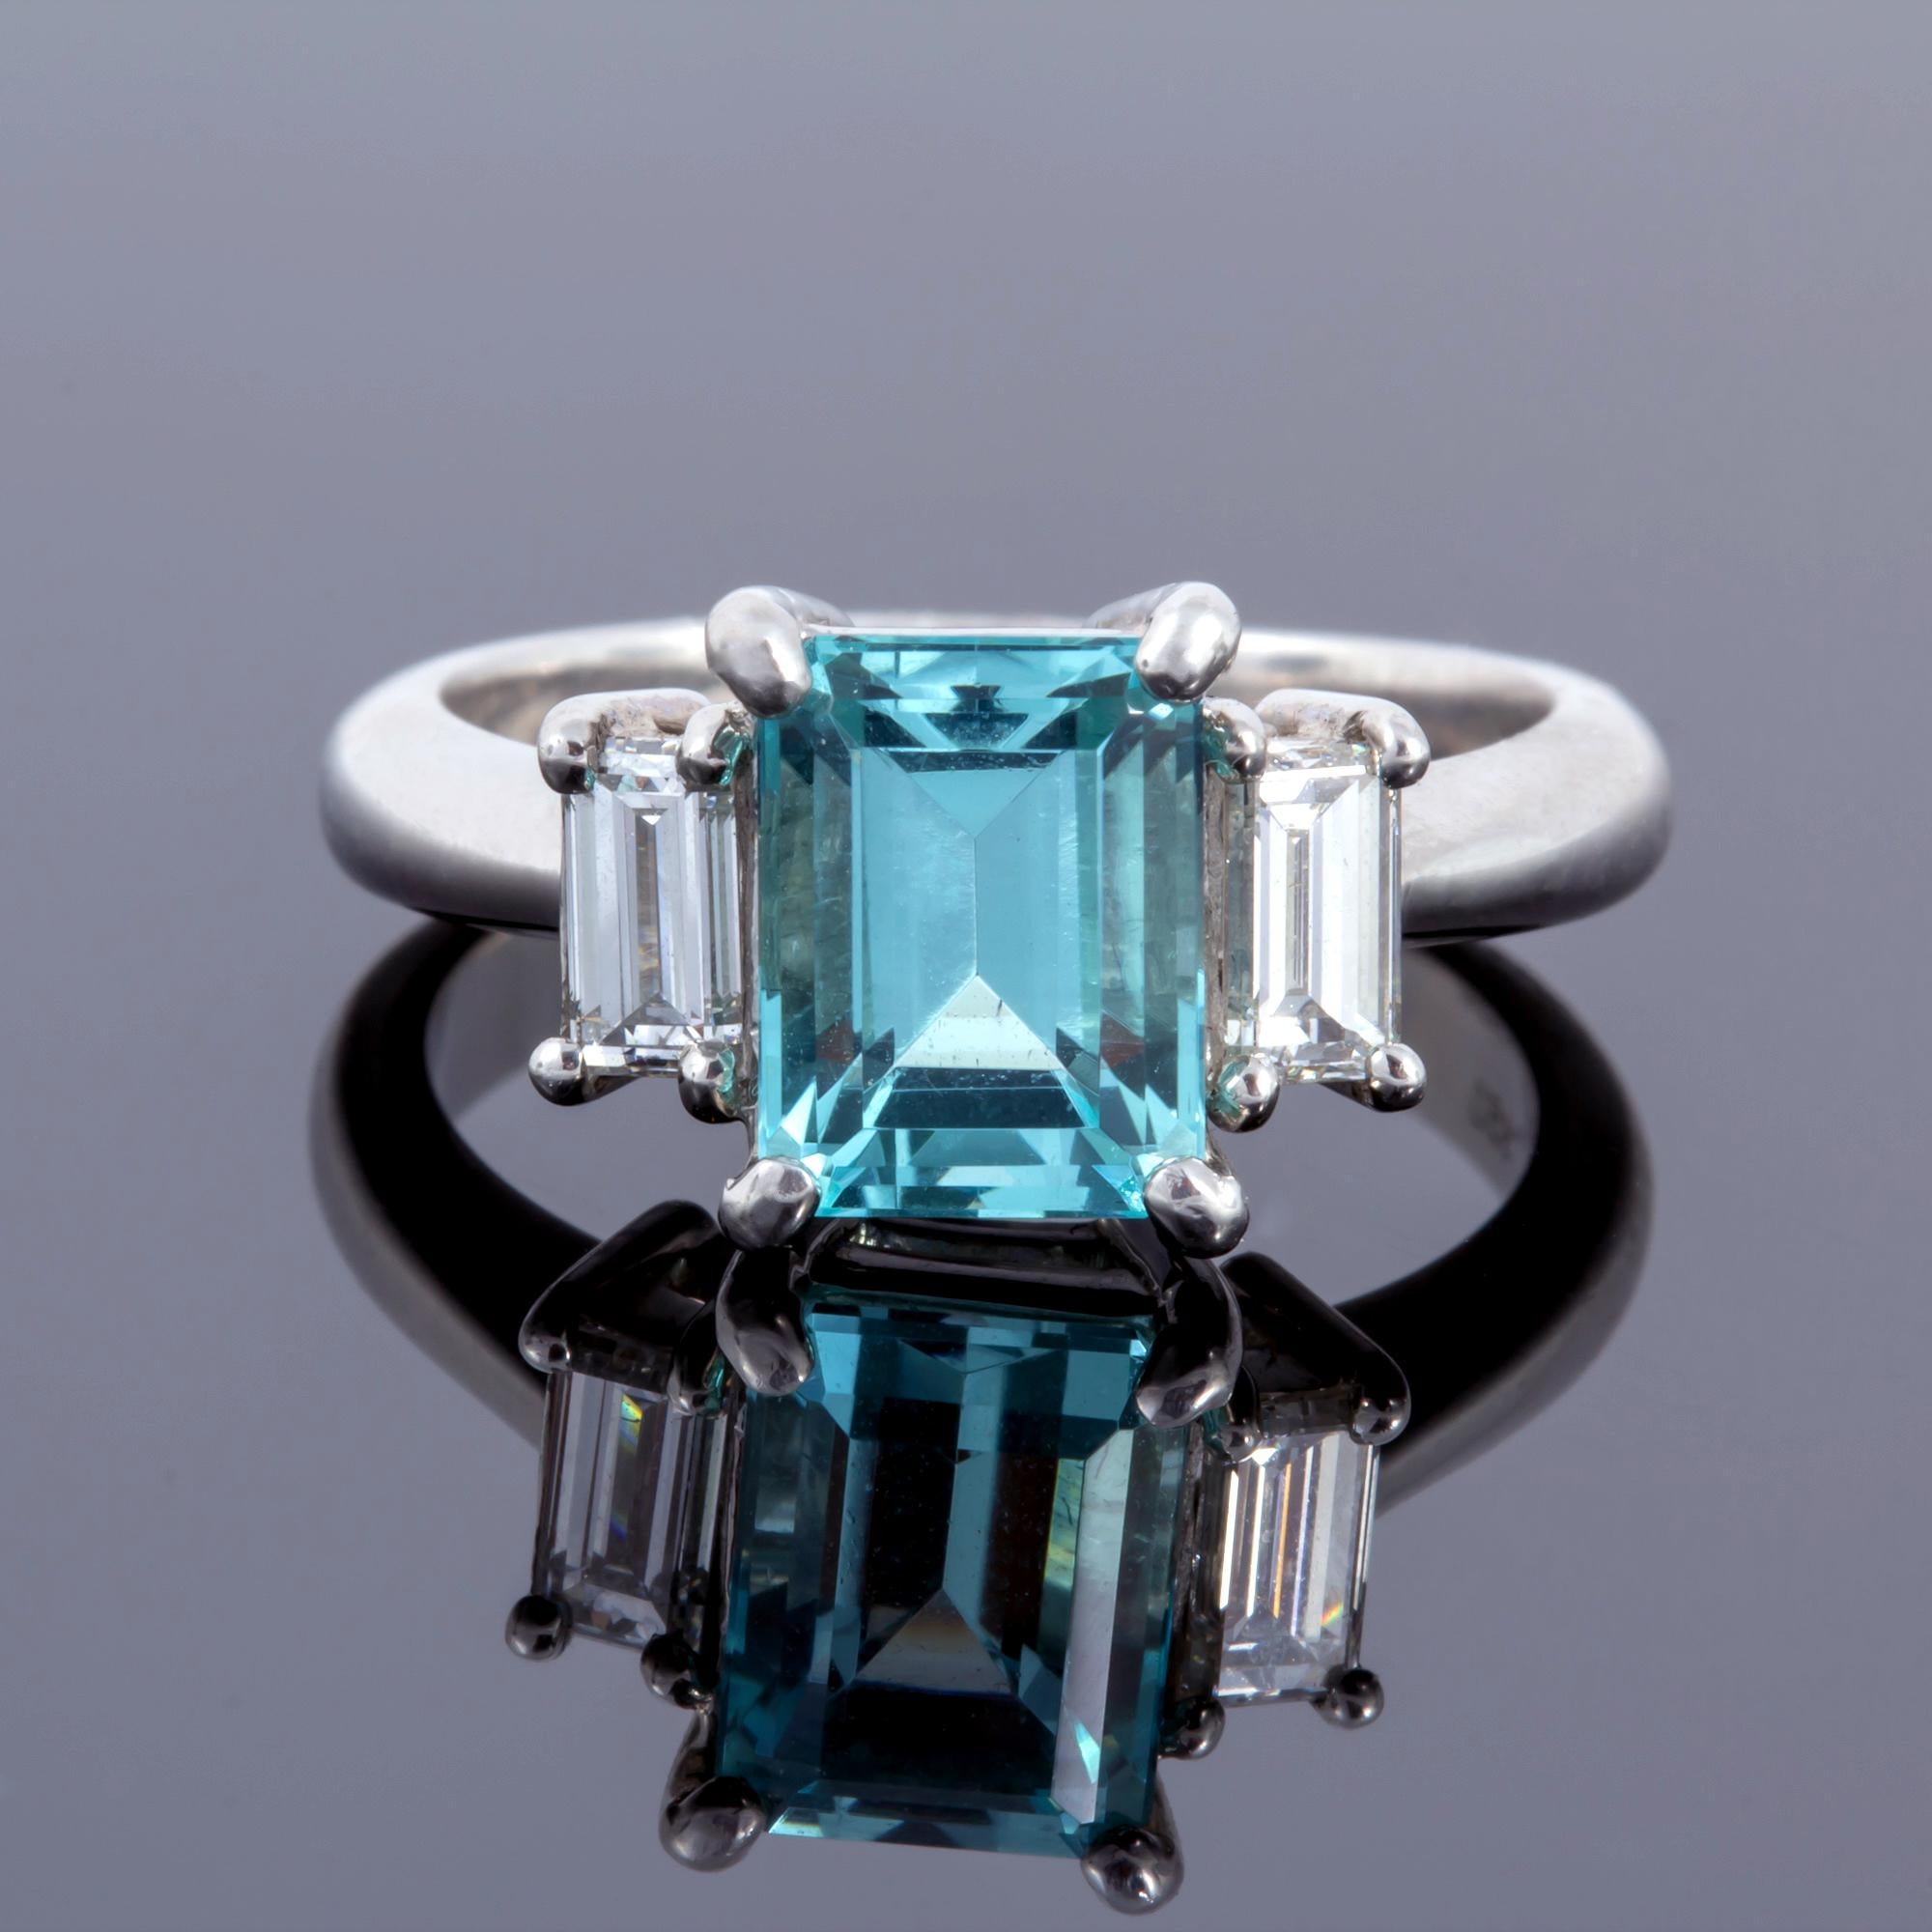 Set in platinum, this rare Paraiba tourmaline gem centered between two diamond baguettes.  Can be sized to fit anyone.  Loupe clean and stunning engagement ring offering one of the rarest stones in the world.

Created by noted jewelry designer David